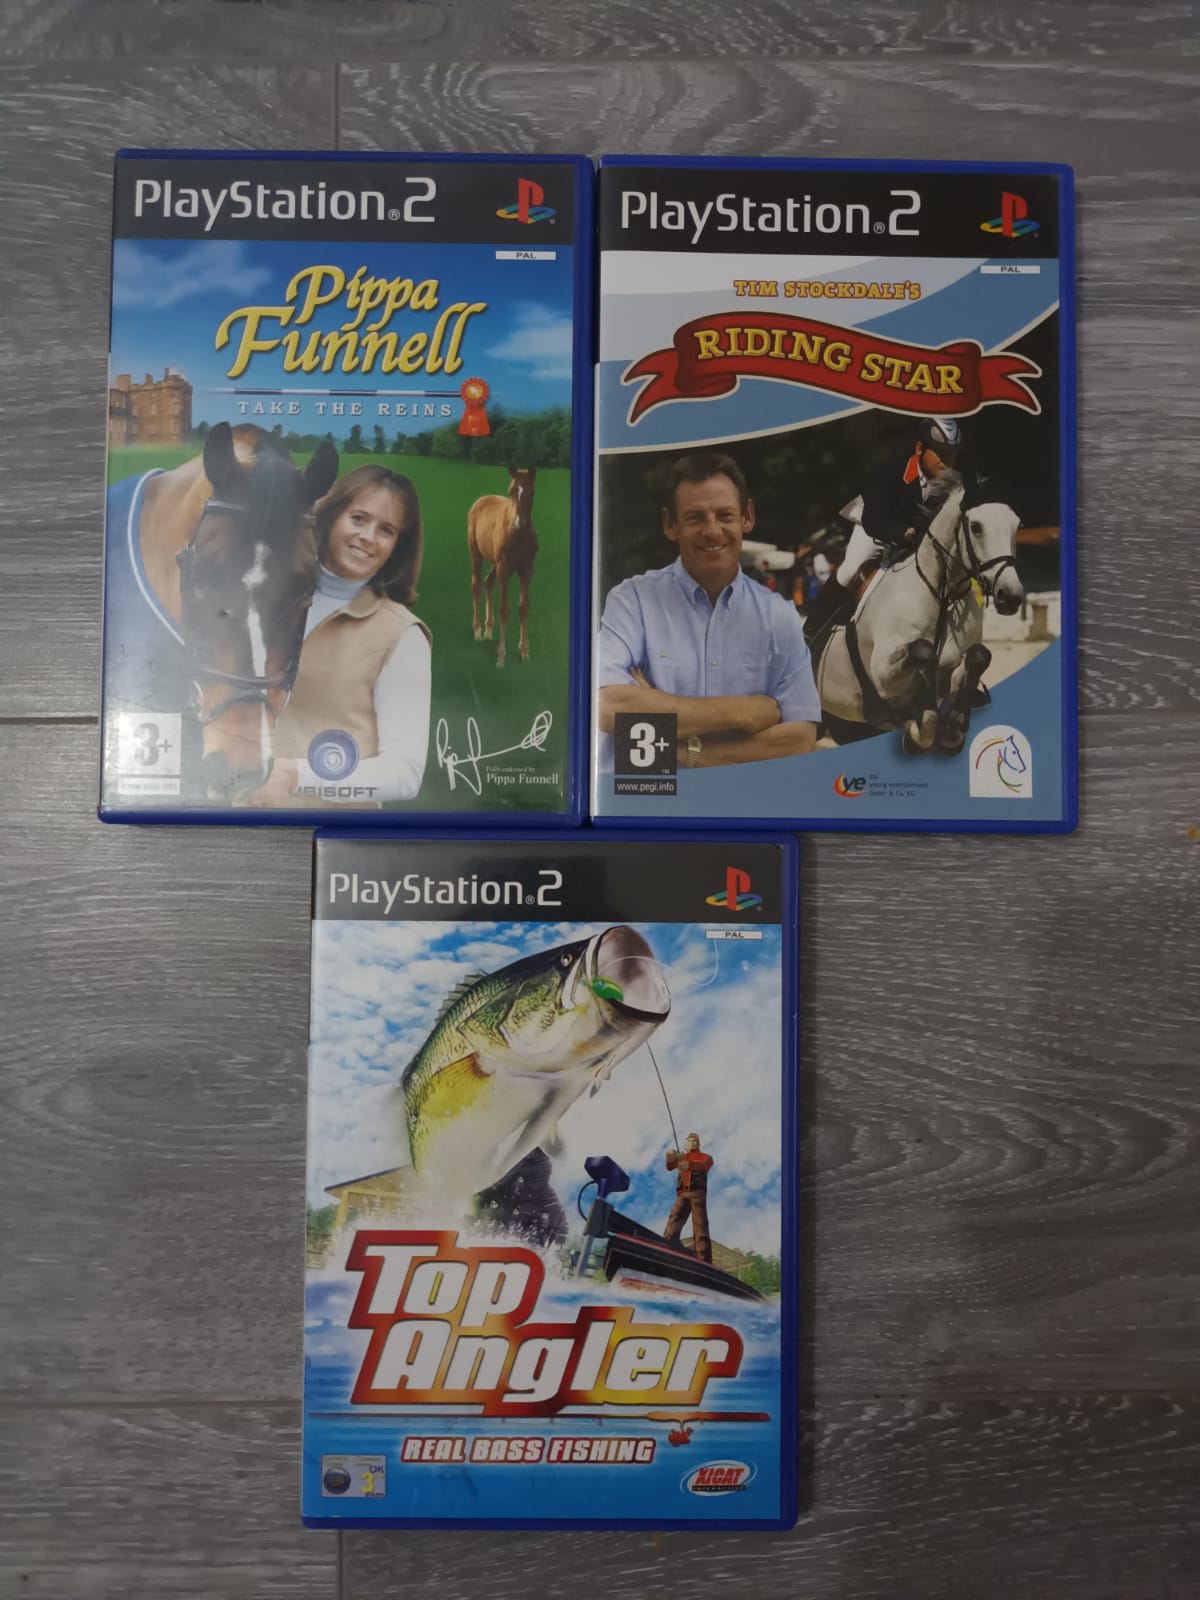 Joc PS2 Pippa Funnell + Riding Star + Top Angler Real Bass Fishing